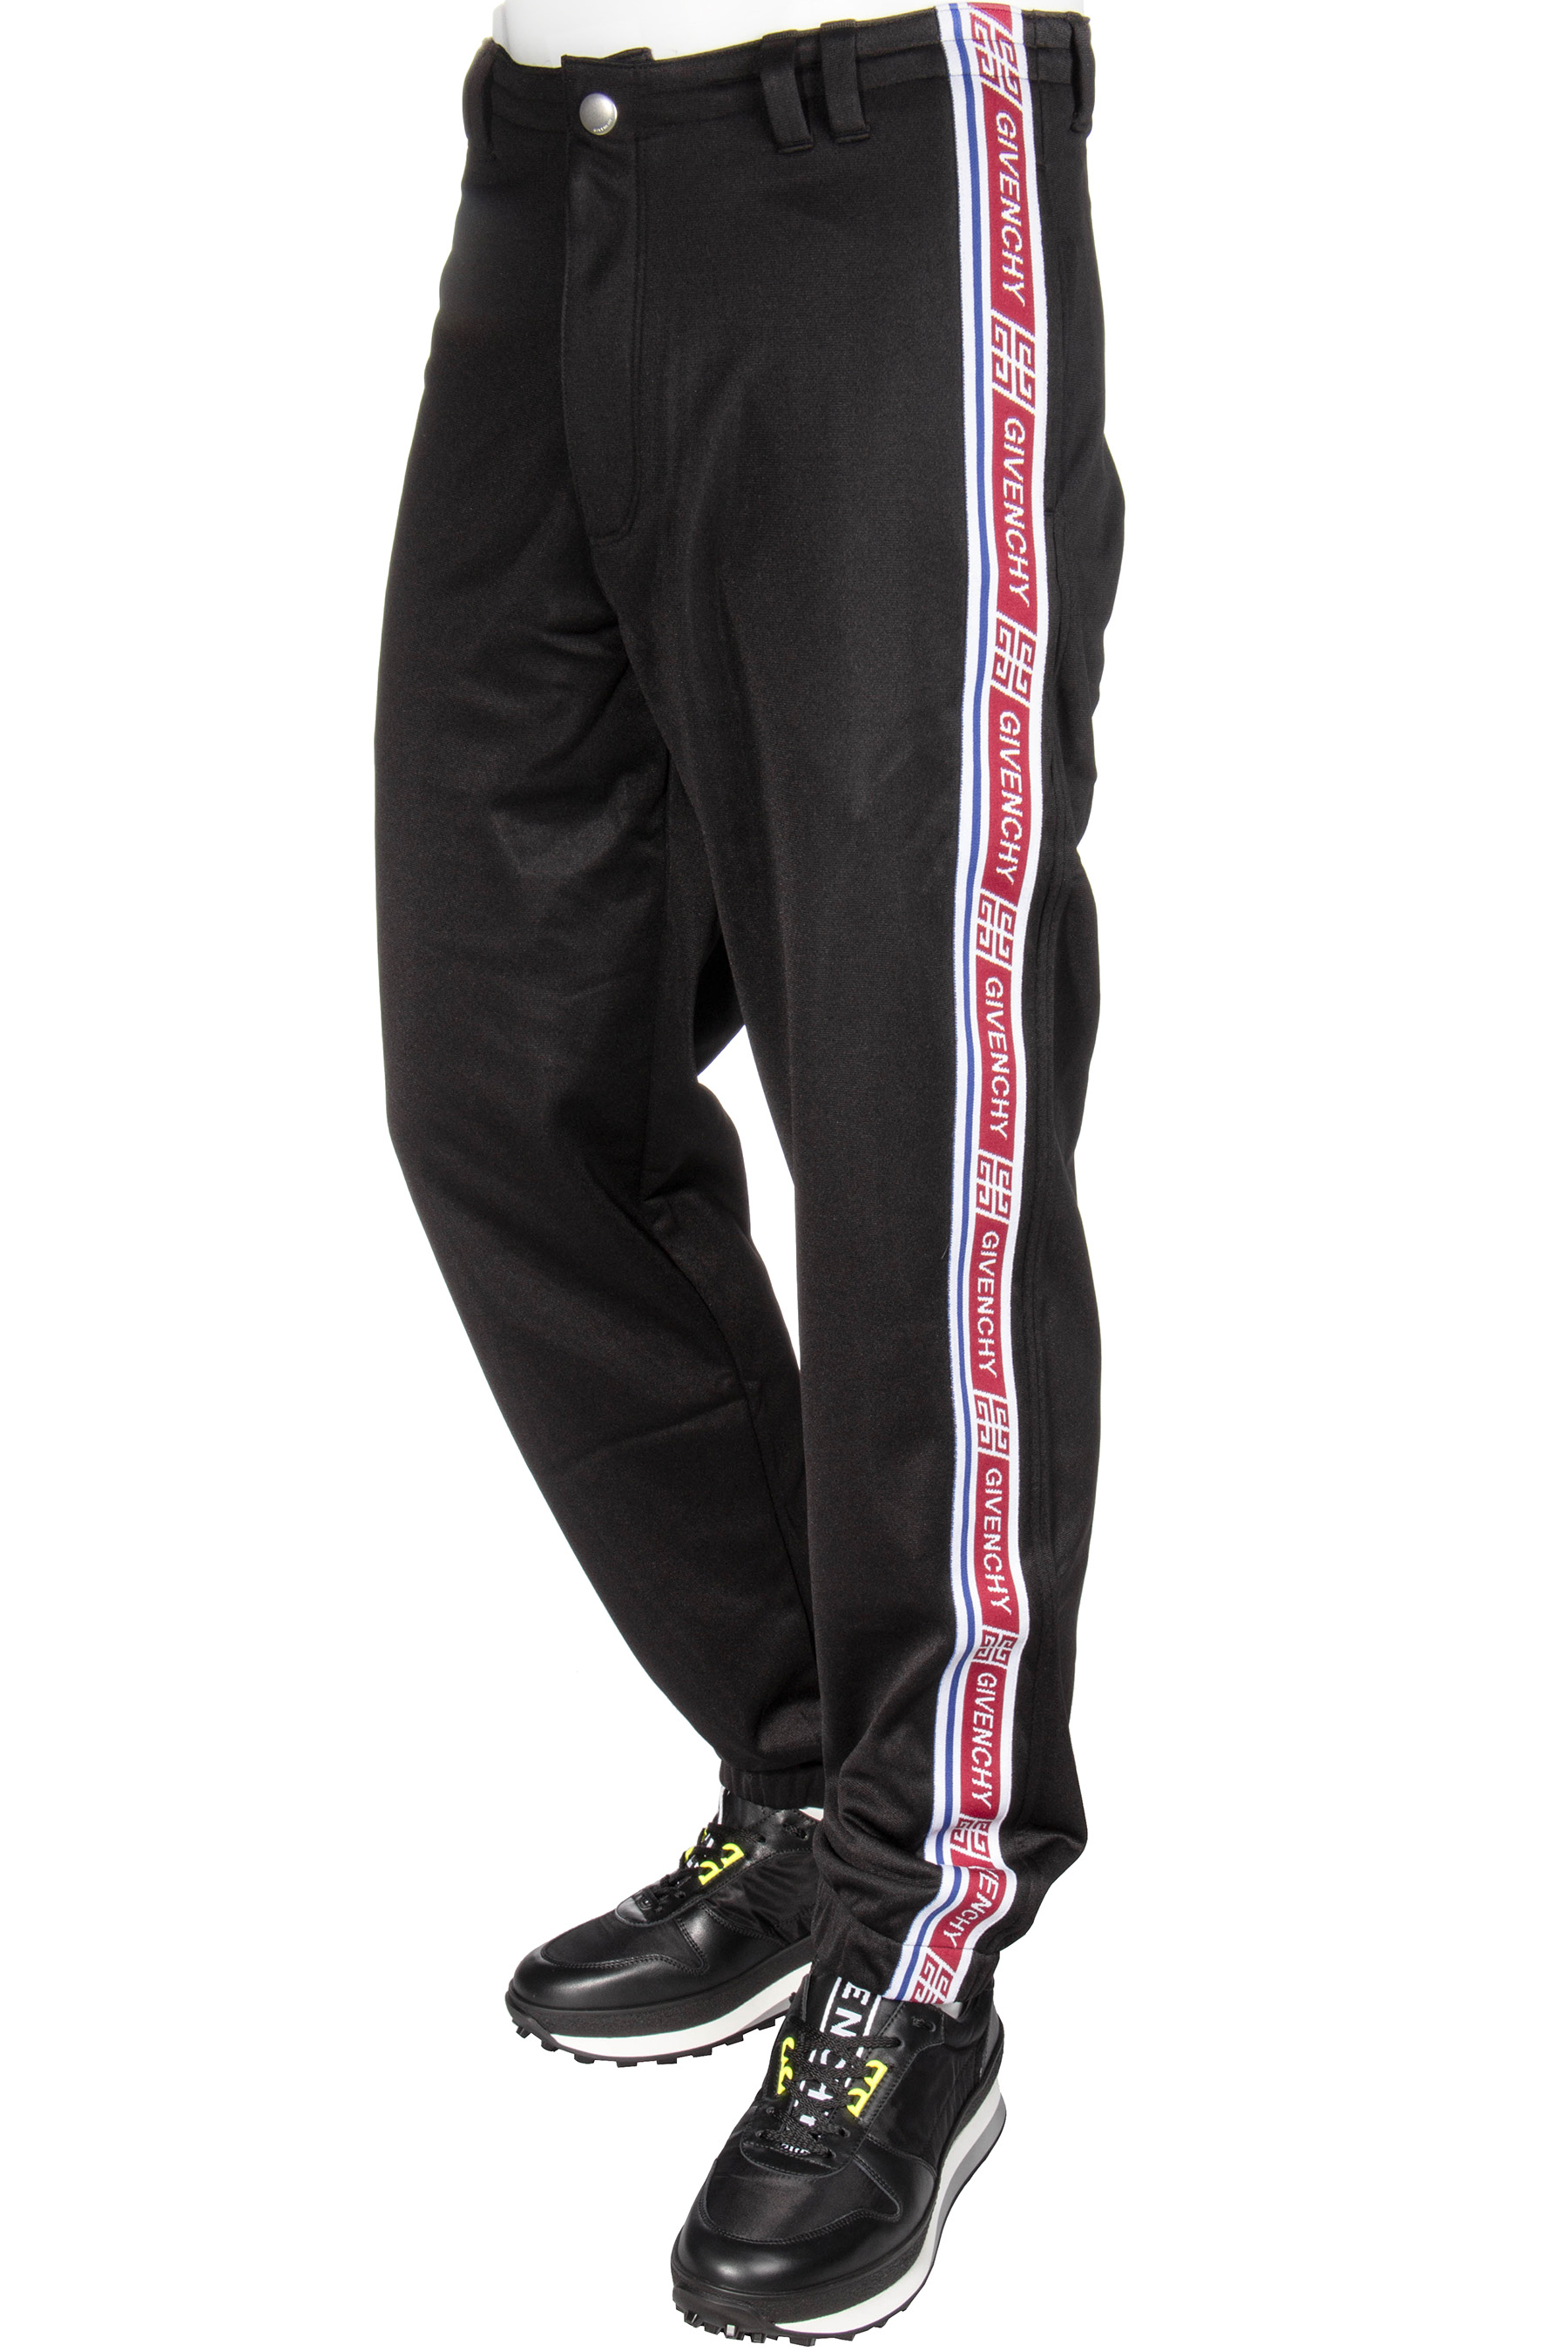 givenchy track pants womens